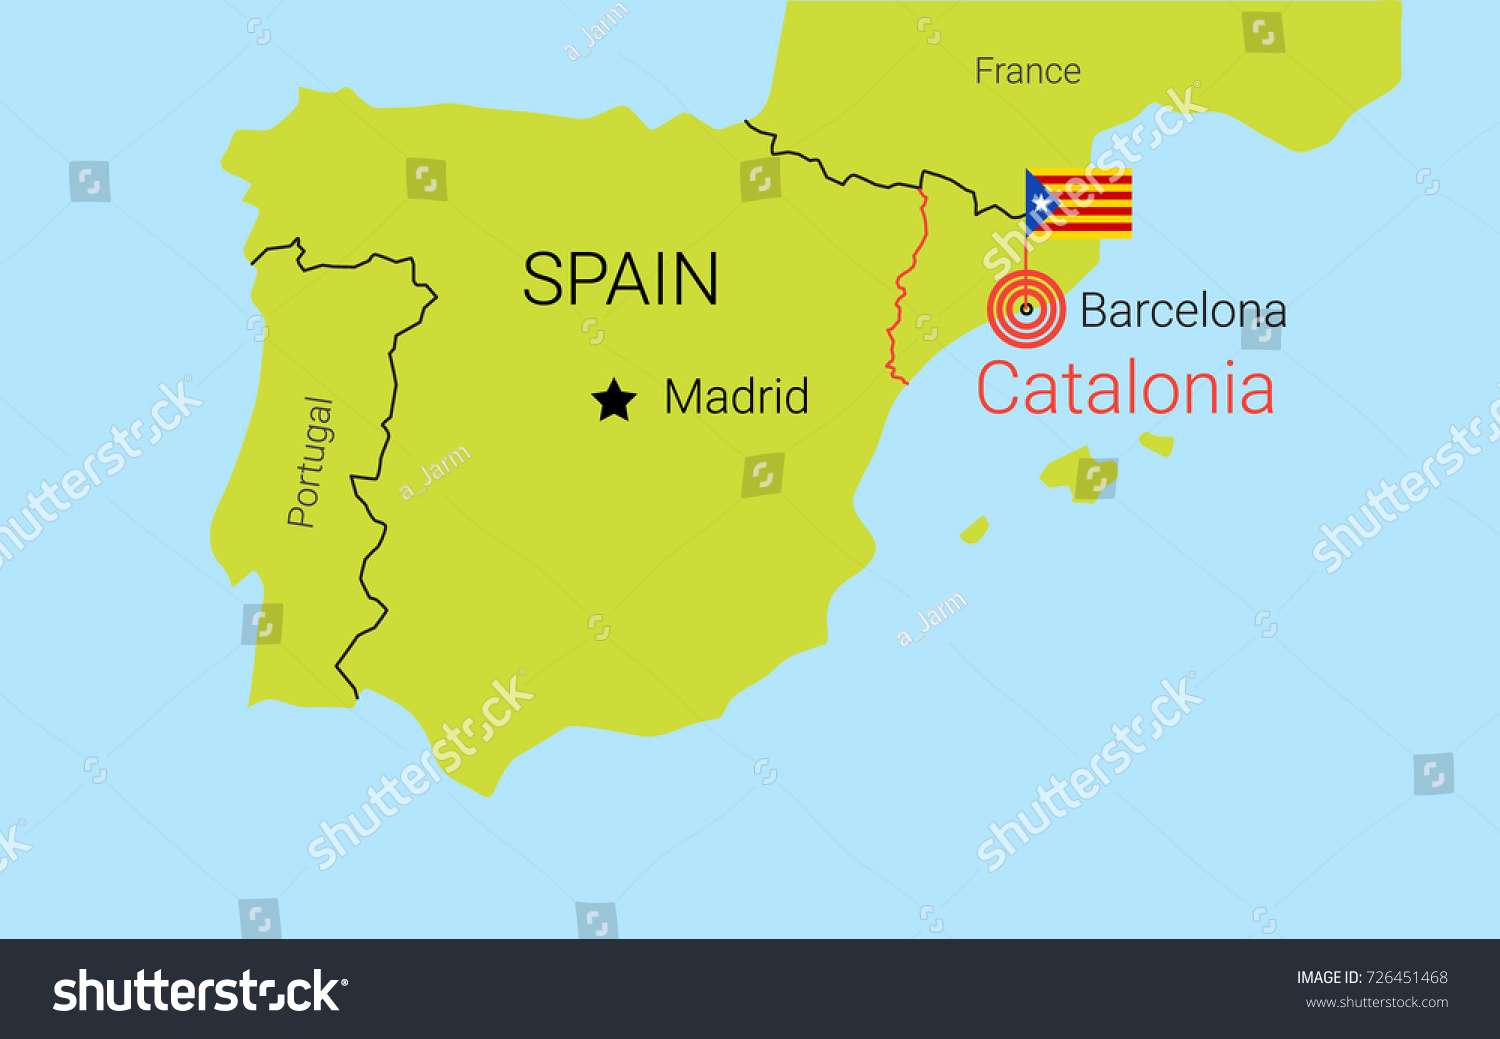 √ Barcelona Catalonia Spain Map / Location Map Showing A Spain B ...